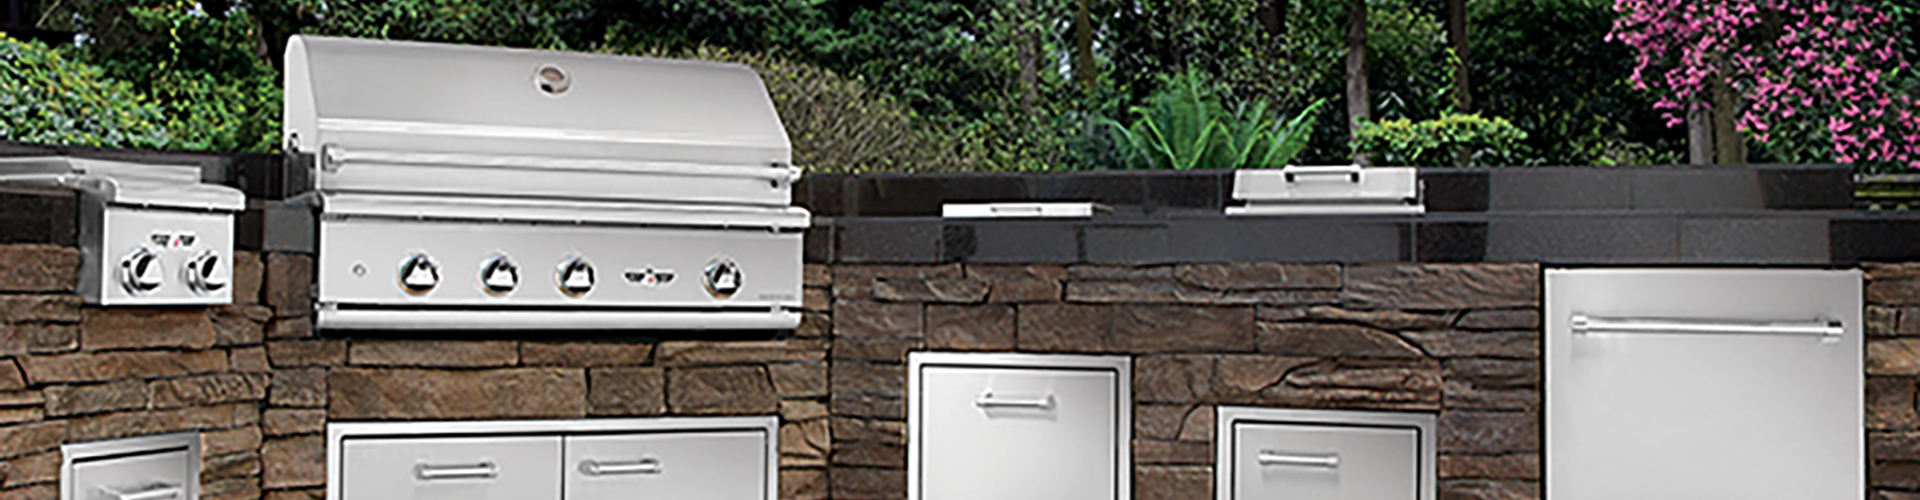 Design Questions to Keep in Mind when Creating an Outdoor Kitchen